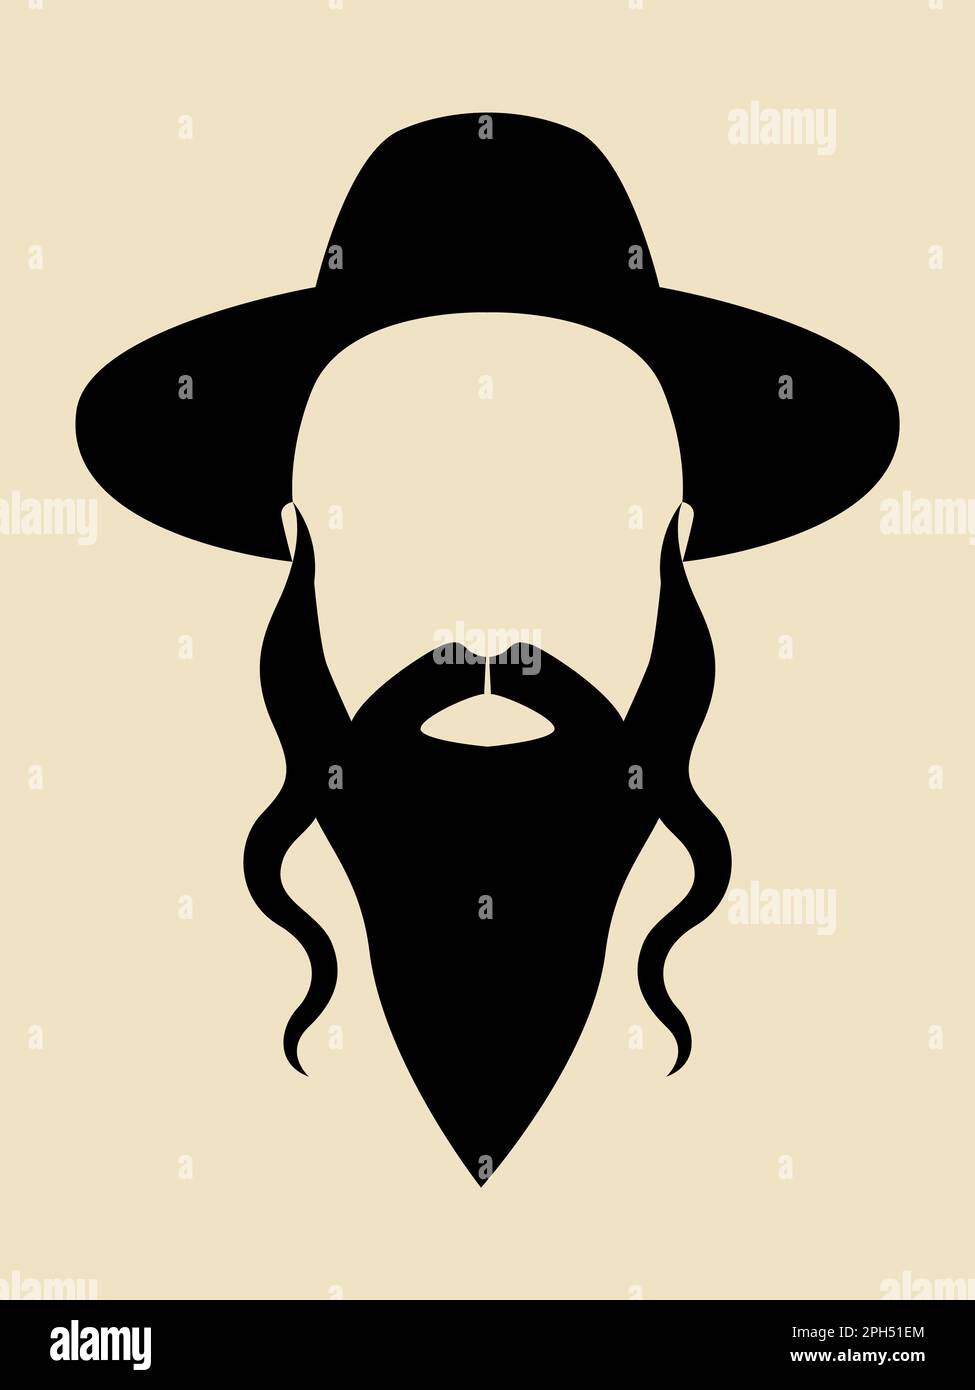 Simple graphic of a man with long beard wearing a hat Stock Photo